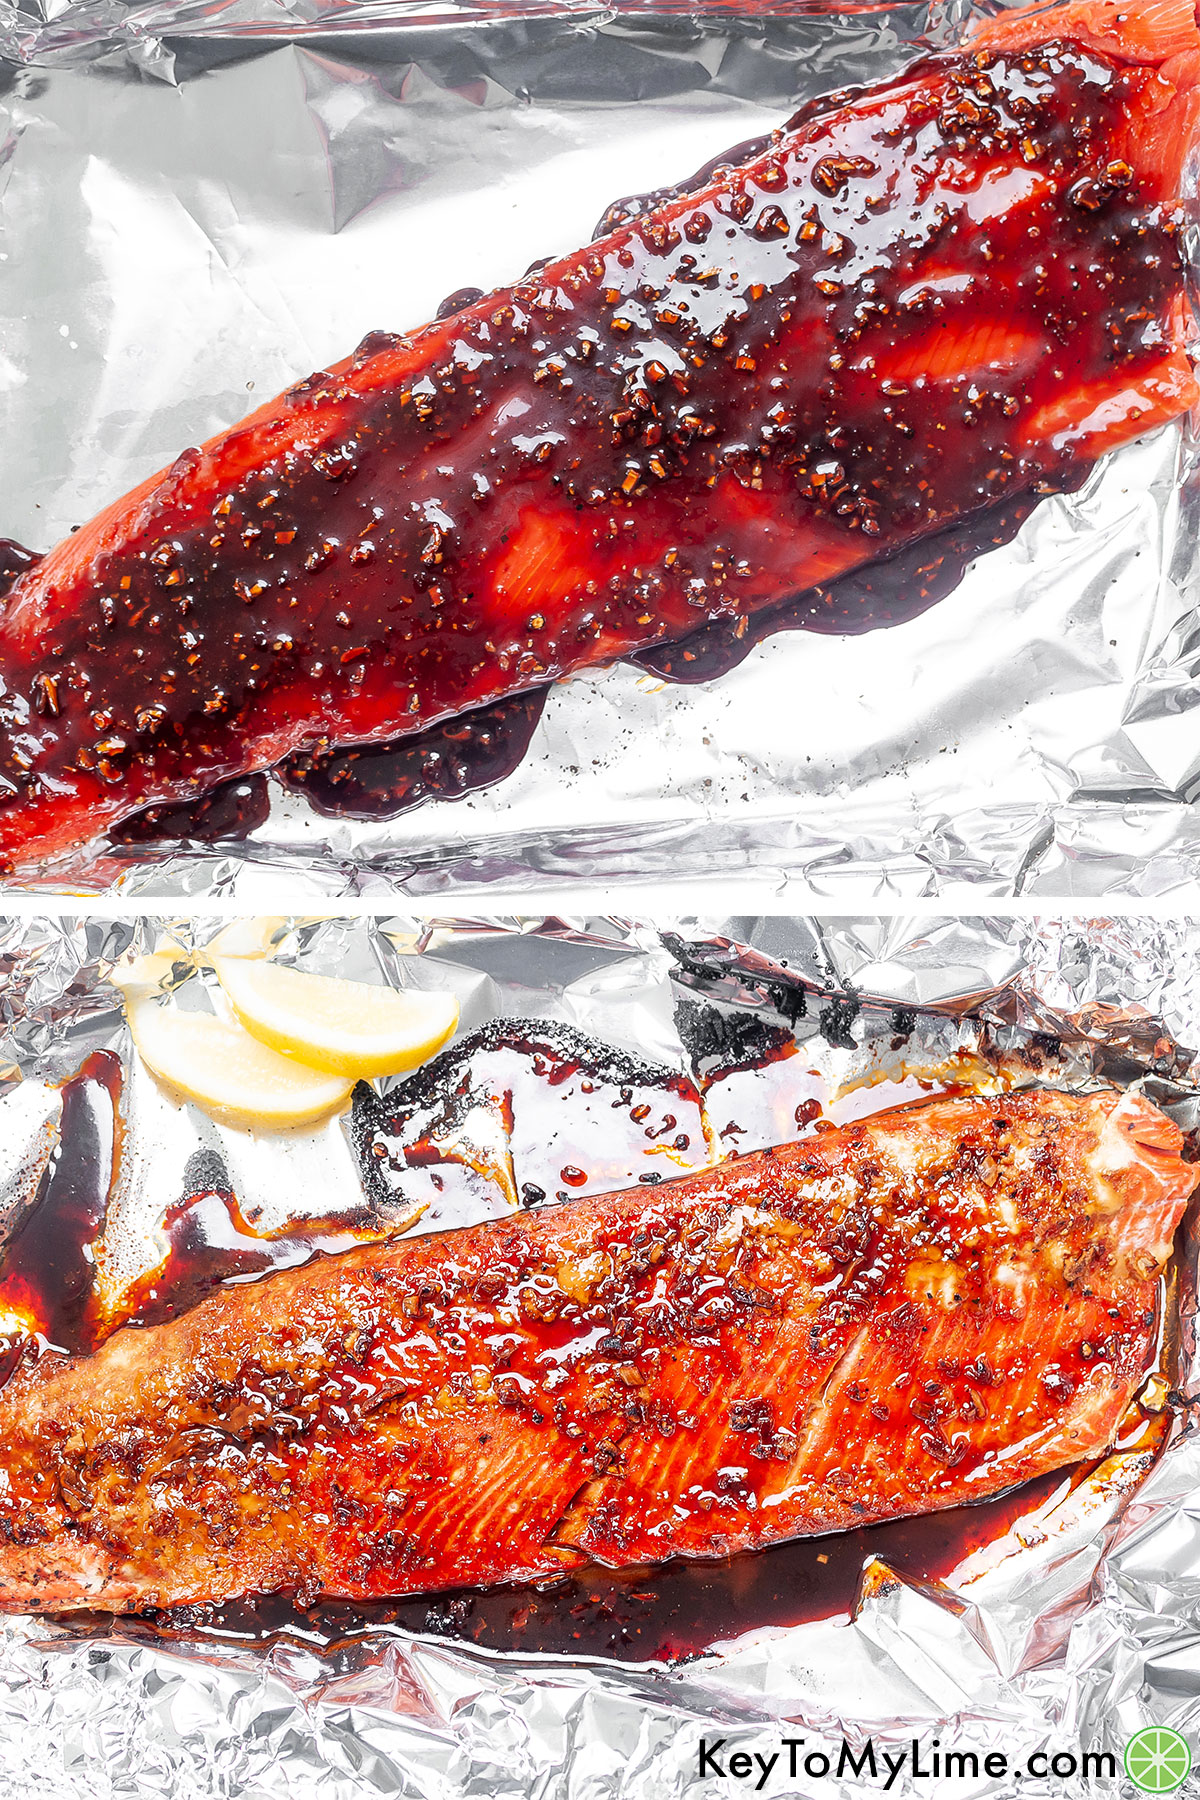 A process collage showing glazed salmon before and after baking.